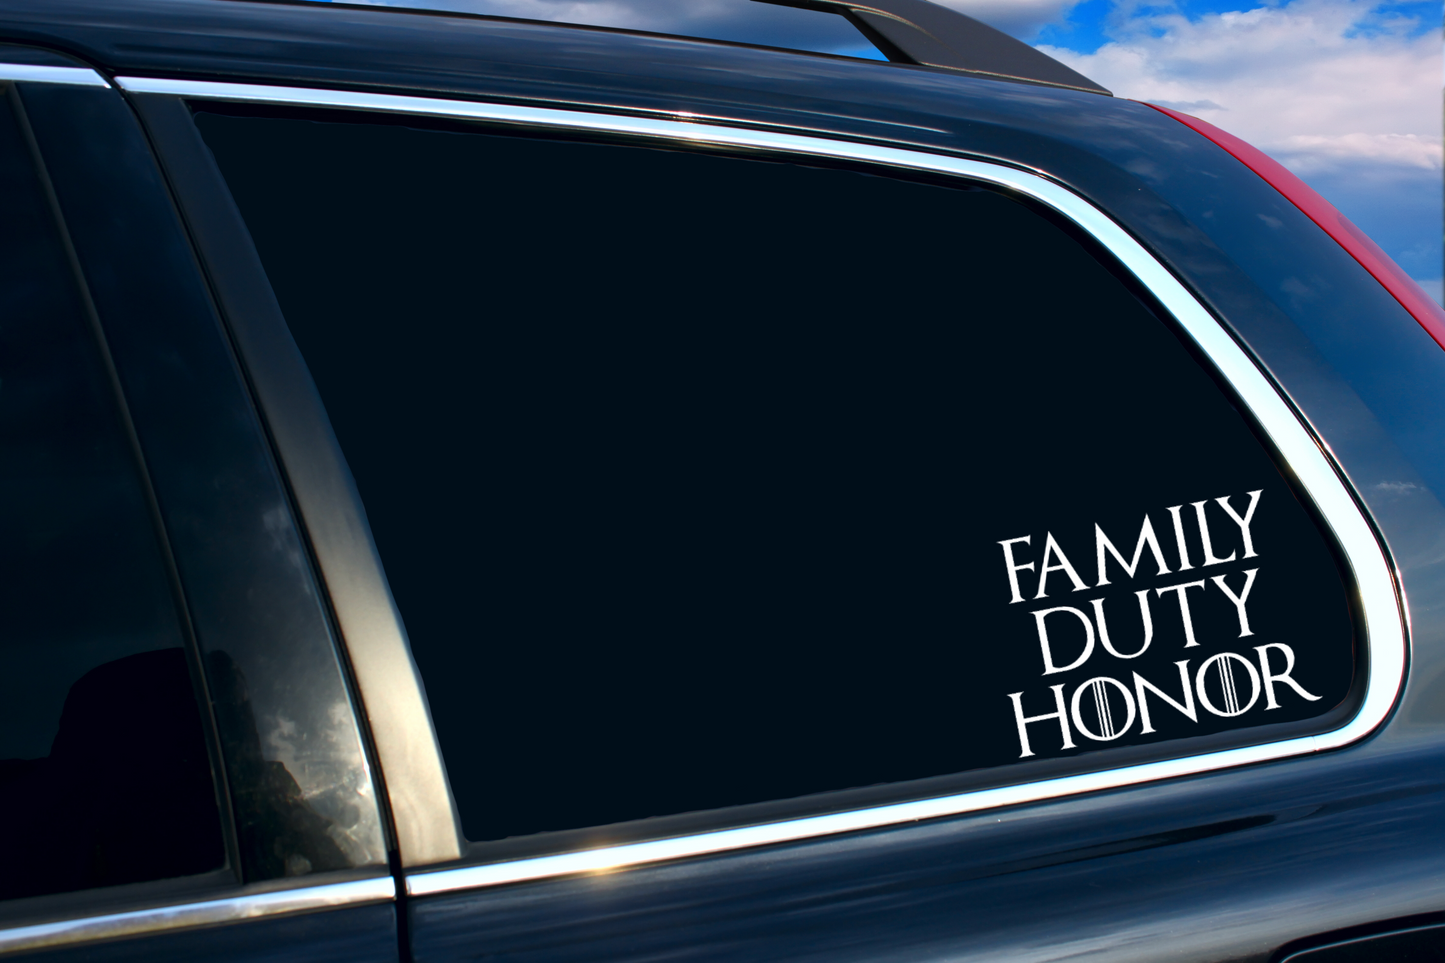 Vinyl Decal | GoT Inspired Trout/Family Duty Honor| Cars, Laptops, Etc